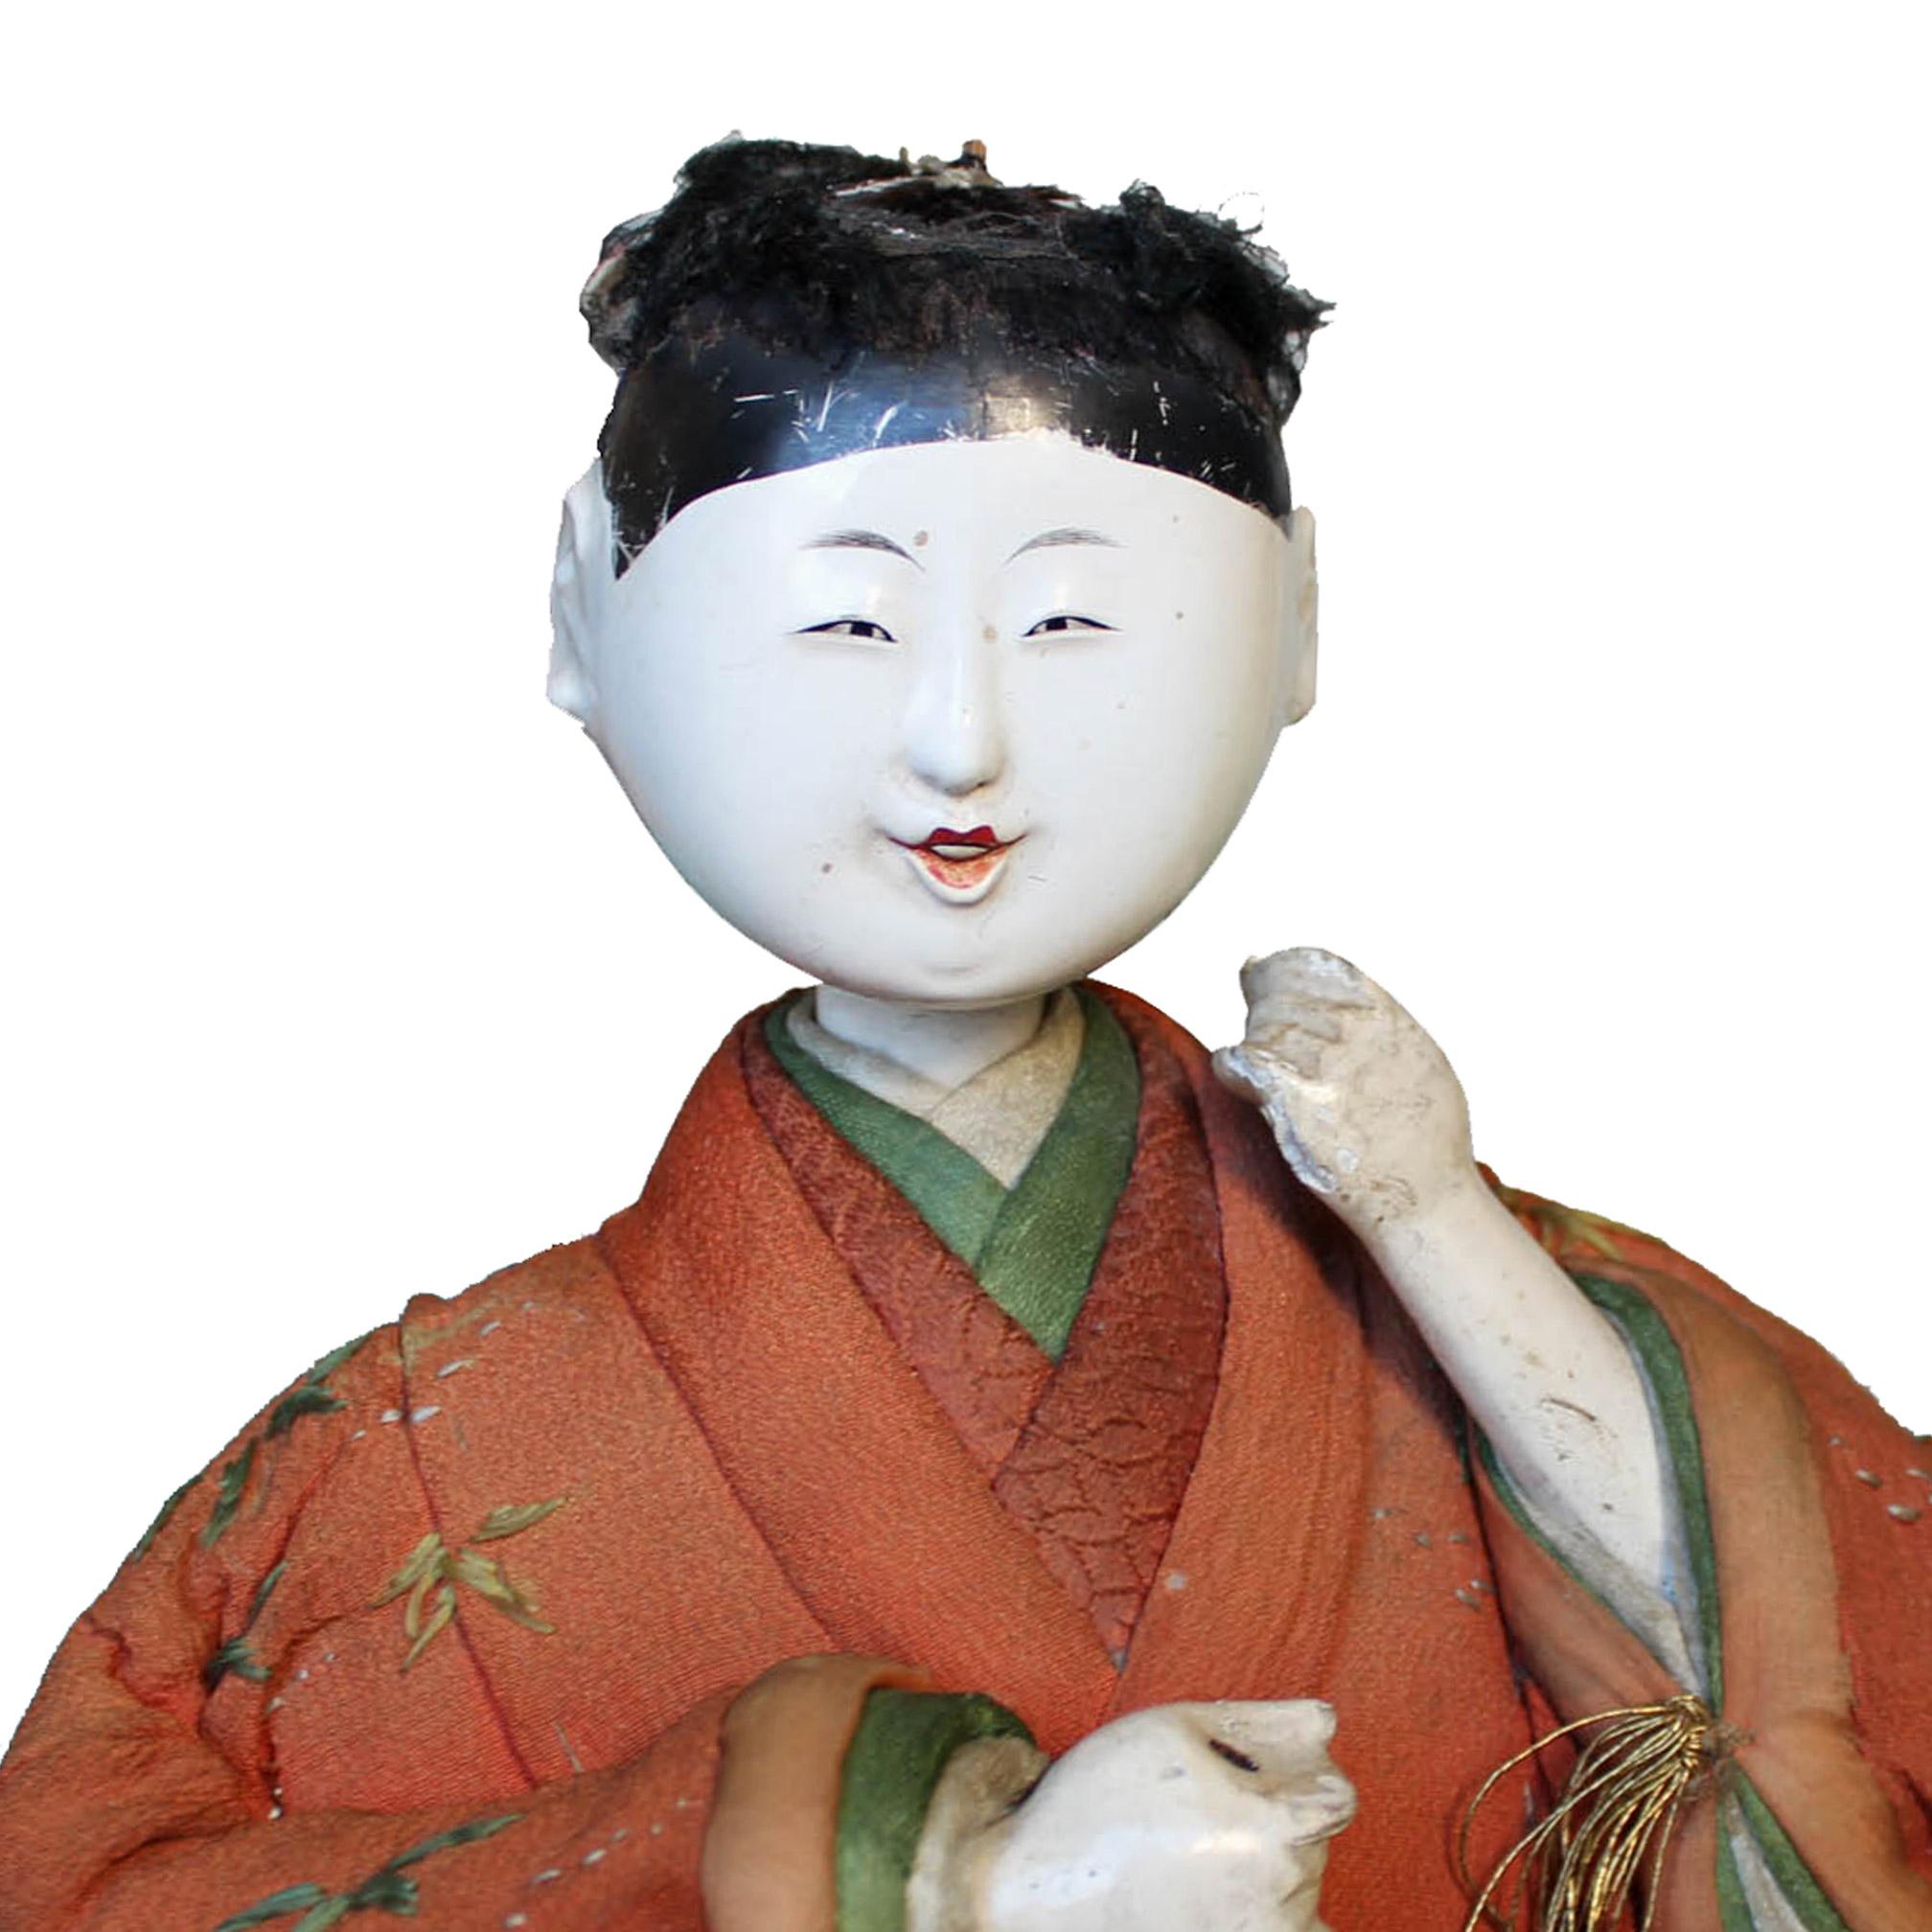 Master artisans skillfully crafted the Kyoto doll with white lacquered wood head and hands, dressed in classic Japanese style clothes made from antique kimono textiles. Doll depicts one of the musicians in traditional Japanese Noh theatre. Hand has